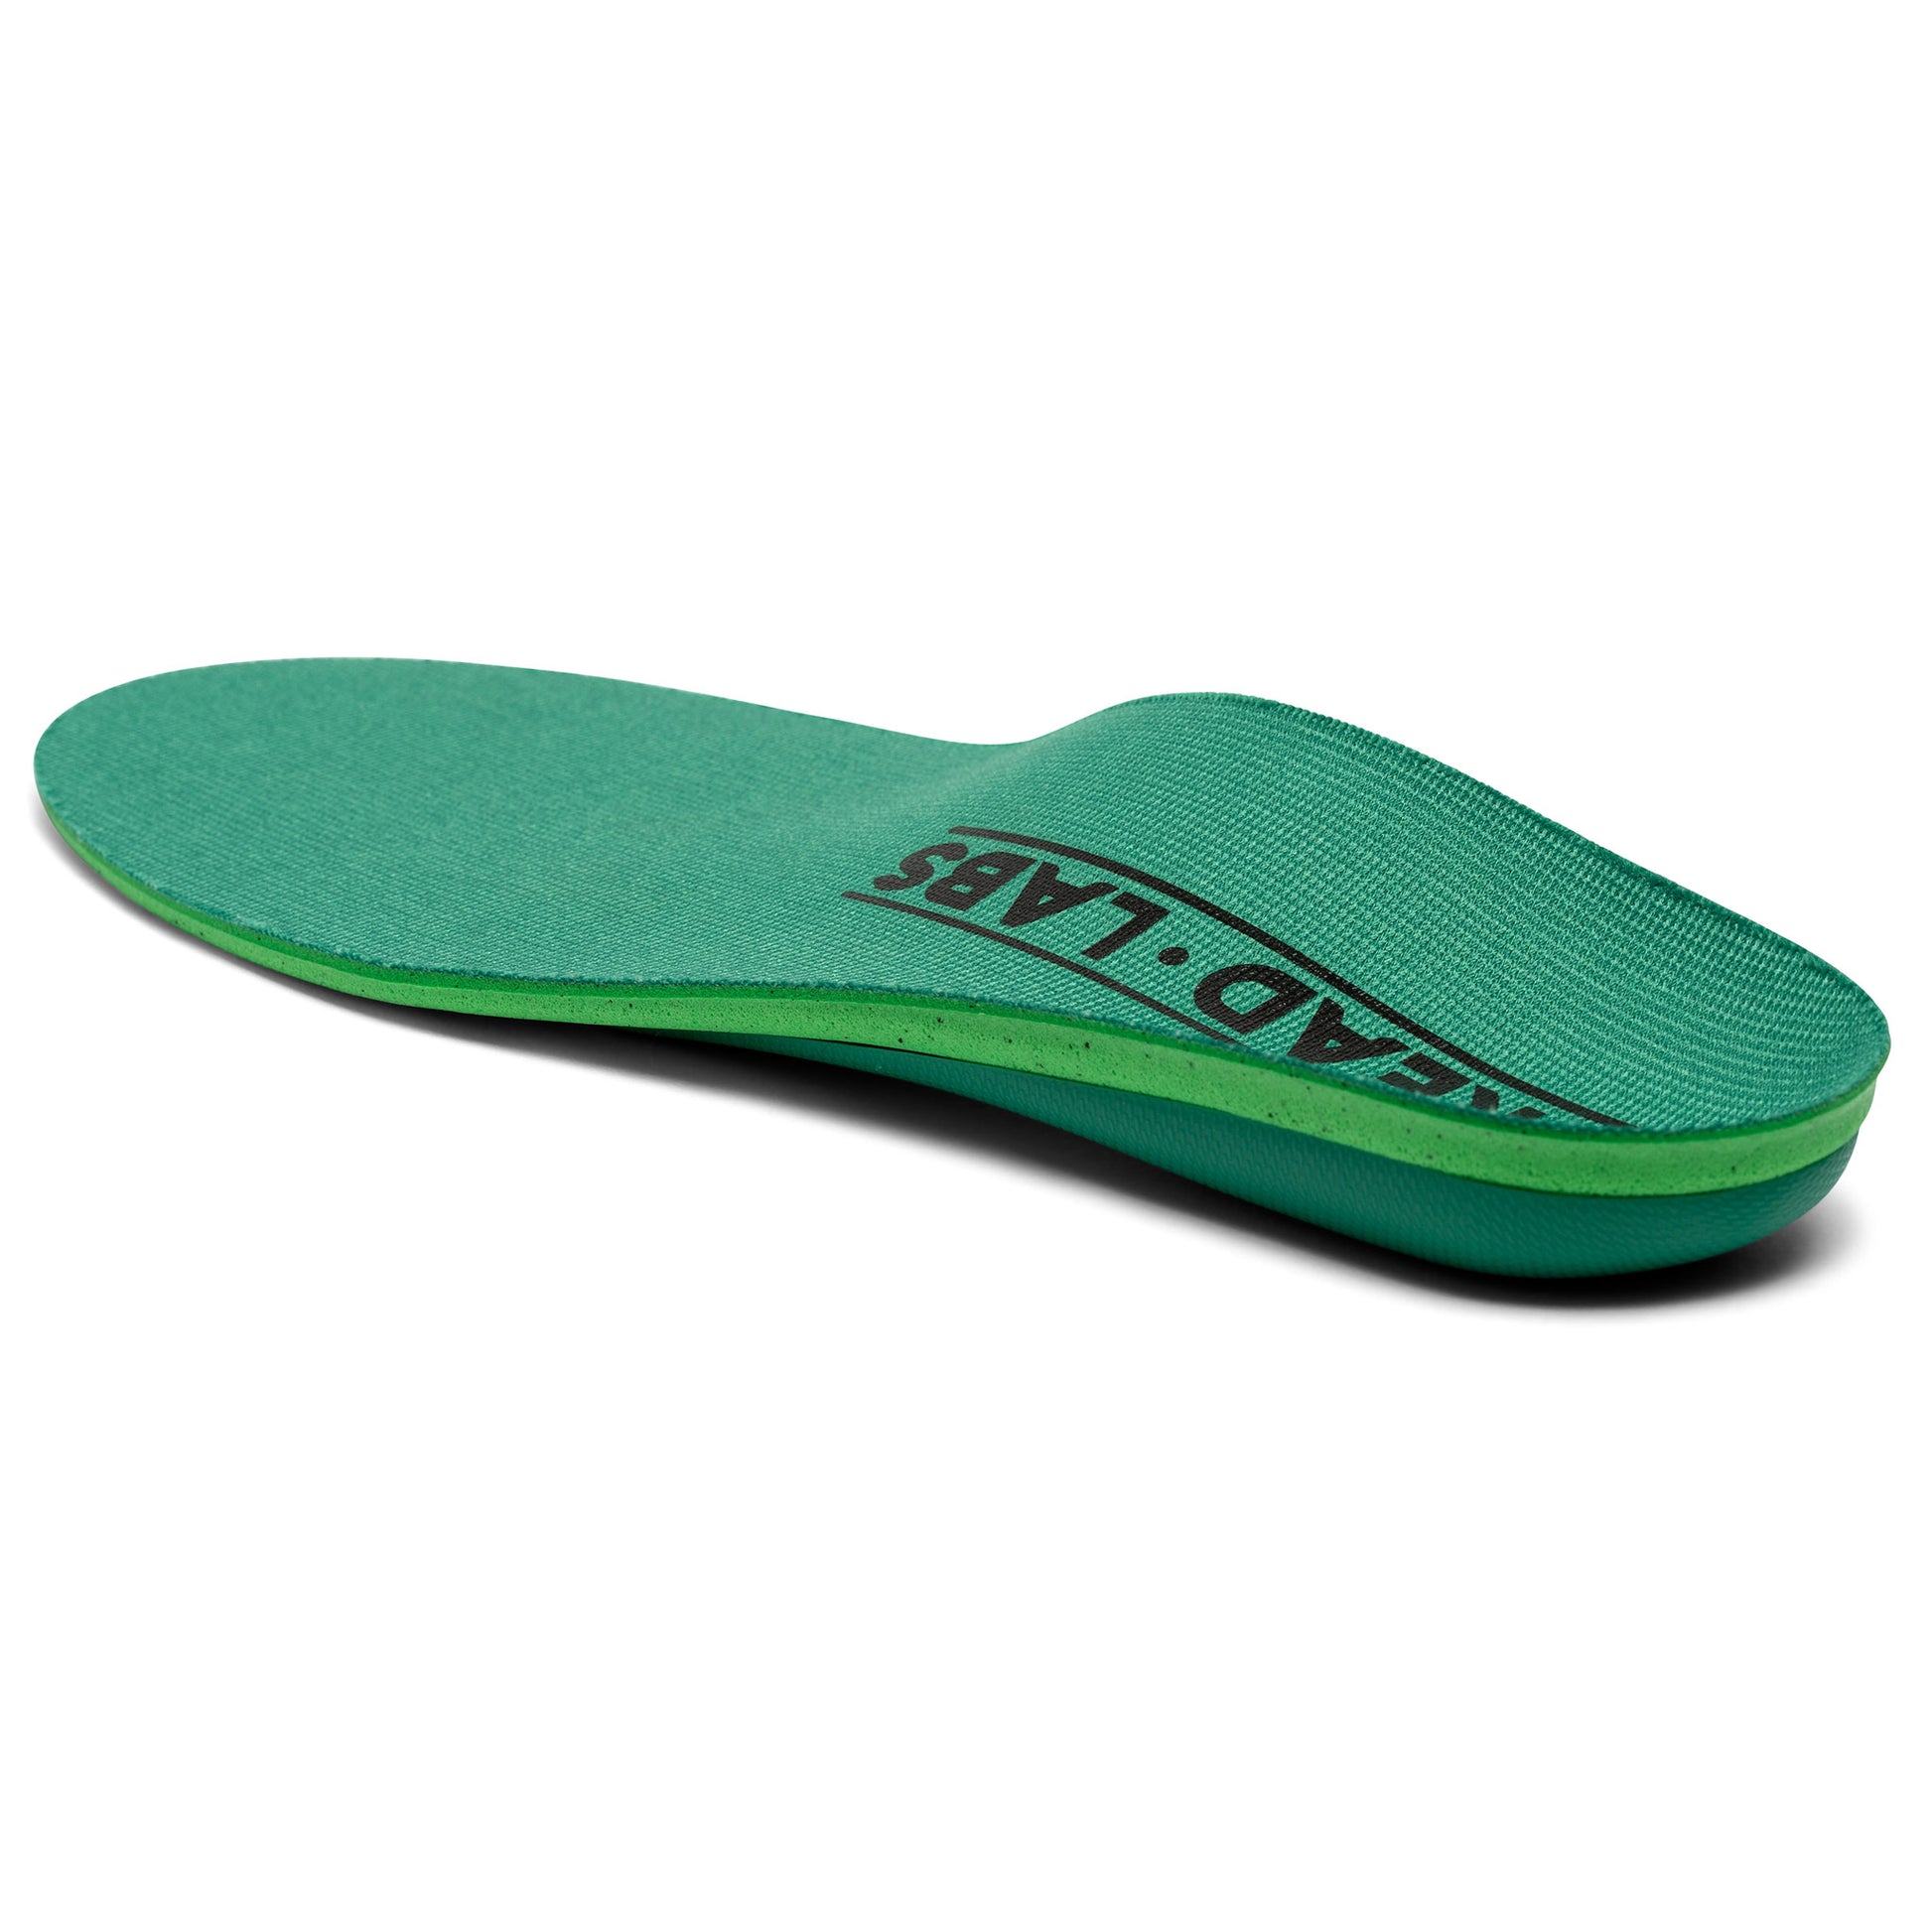 Comfort Insole For Tired Feet From Tread Labs